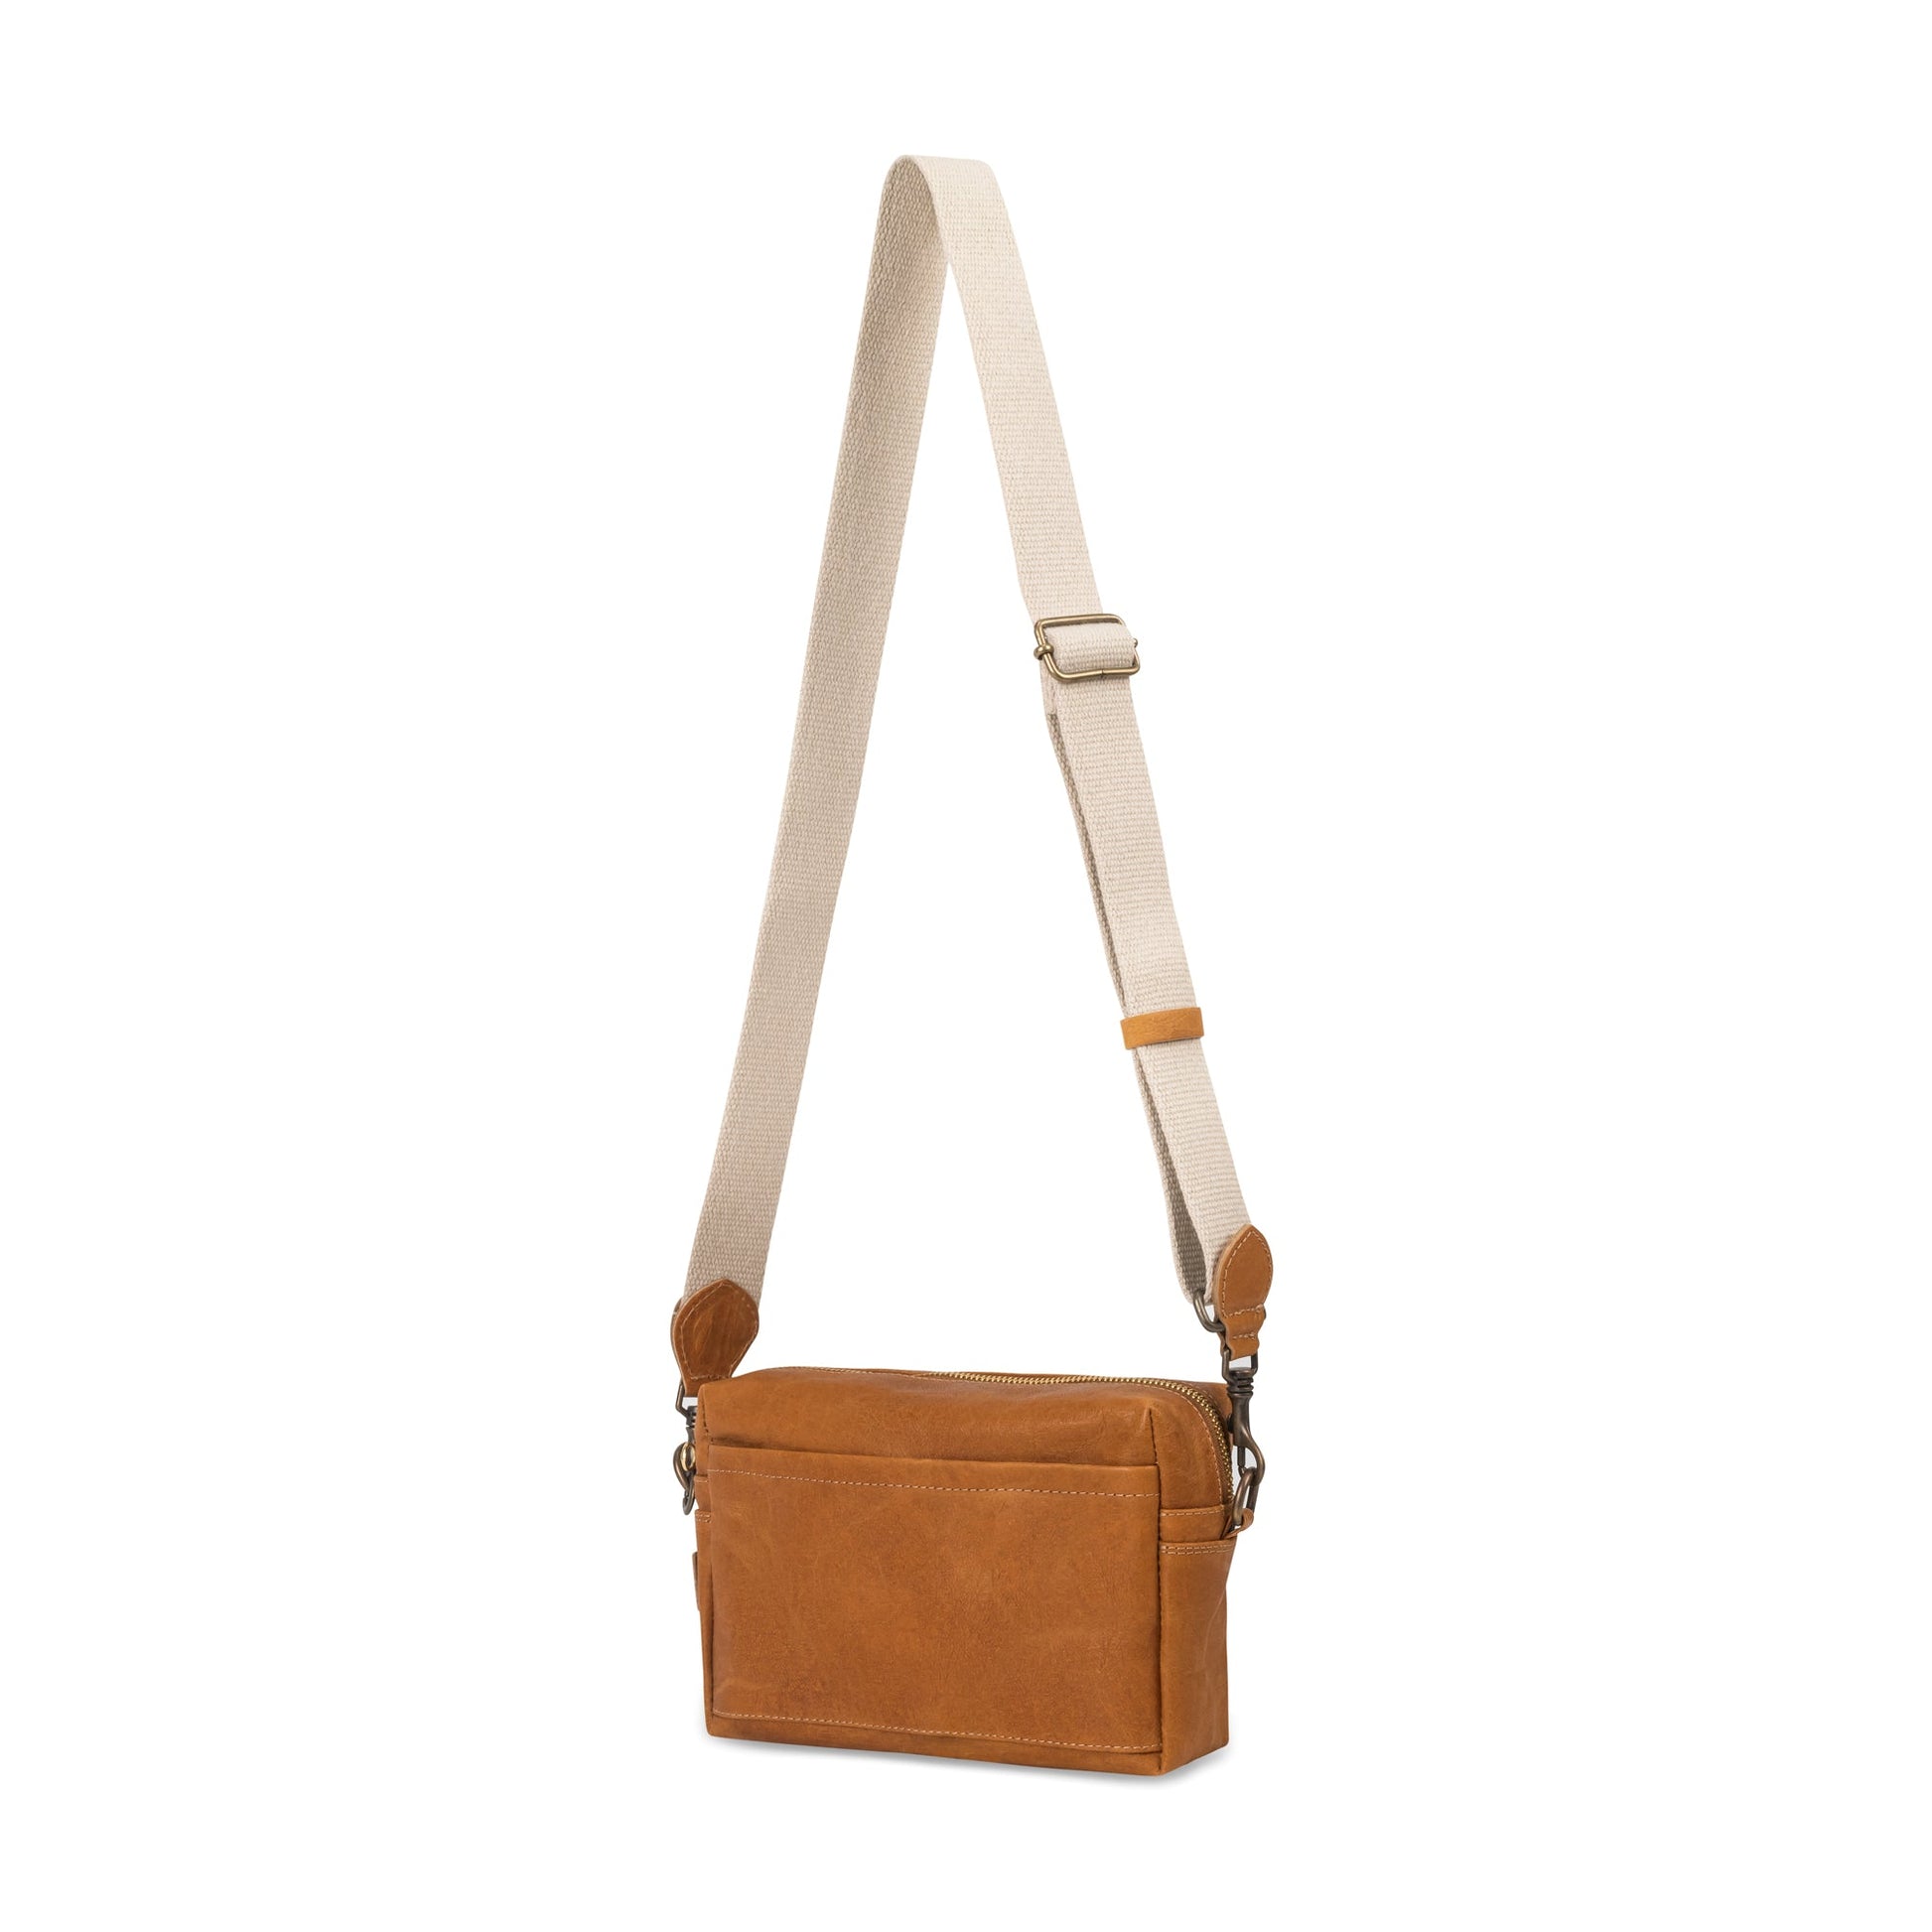 A rectangular washable paper handbag with an external side pocket is shown. The bag has a canvas strap, washable paper details and metal fastening clips to attach the straps to the bag. The bag closes by a zip. The bag shown is tan with a wheat strap.